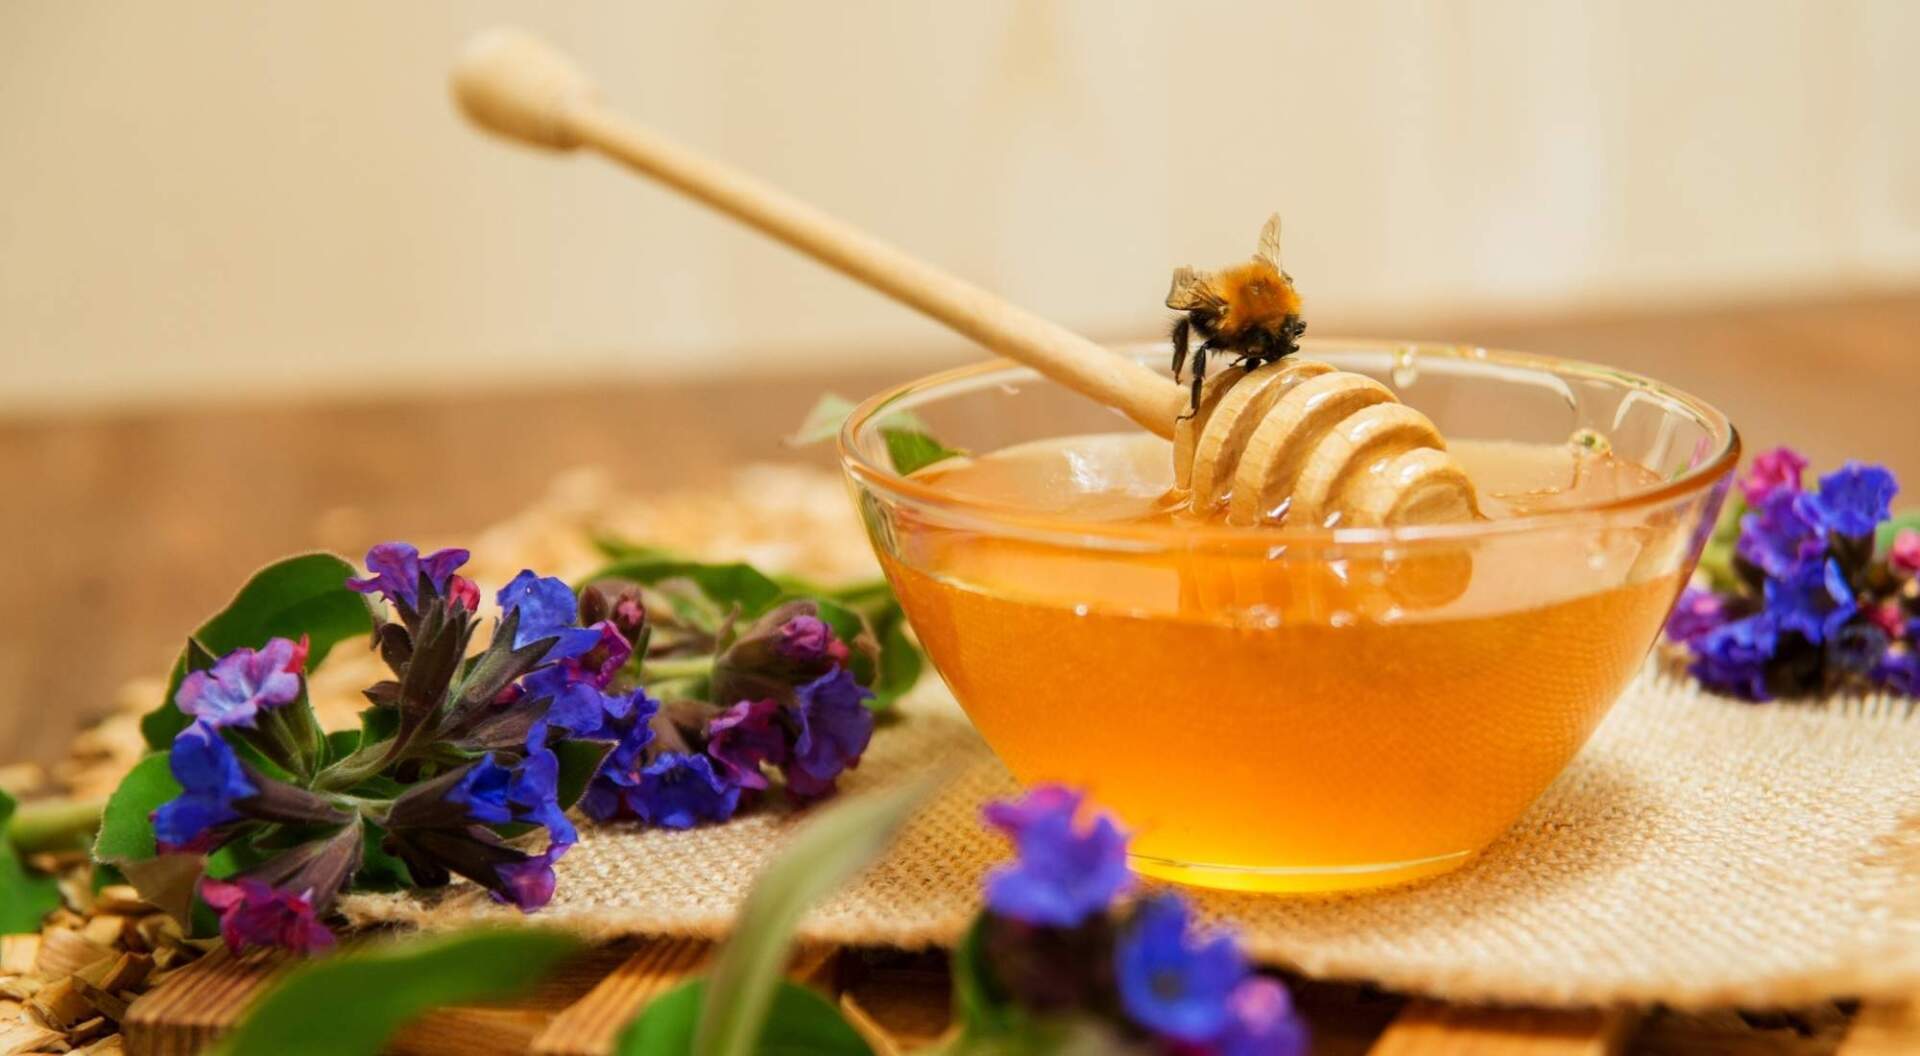 Is Honey A Superfood? Top 5 Benefits of Adding Honey to Your Diet